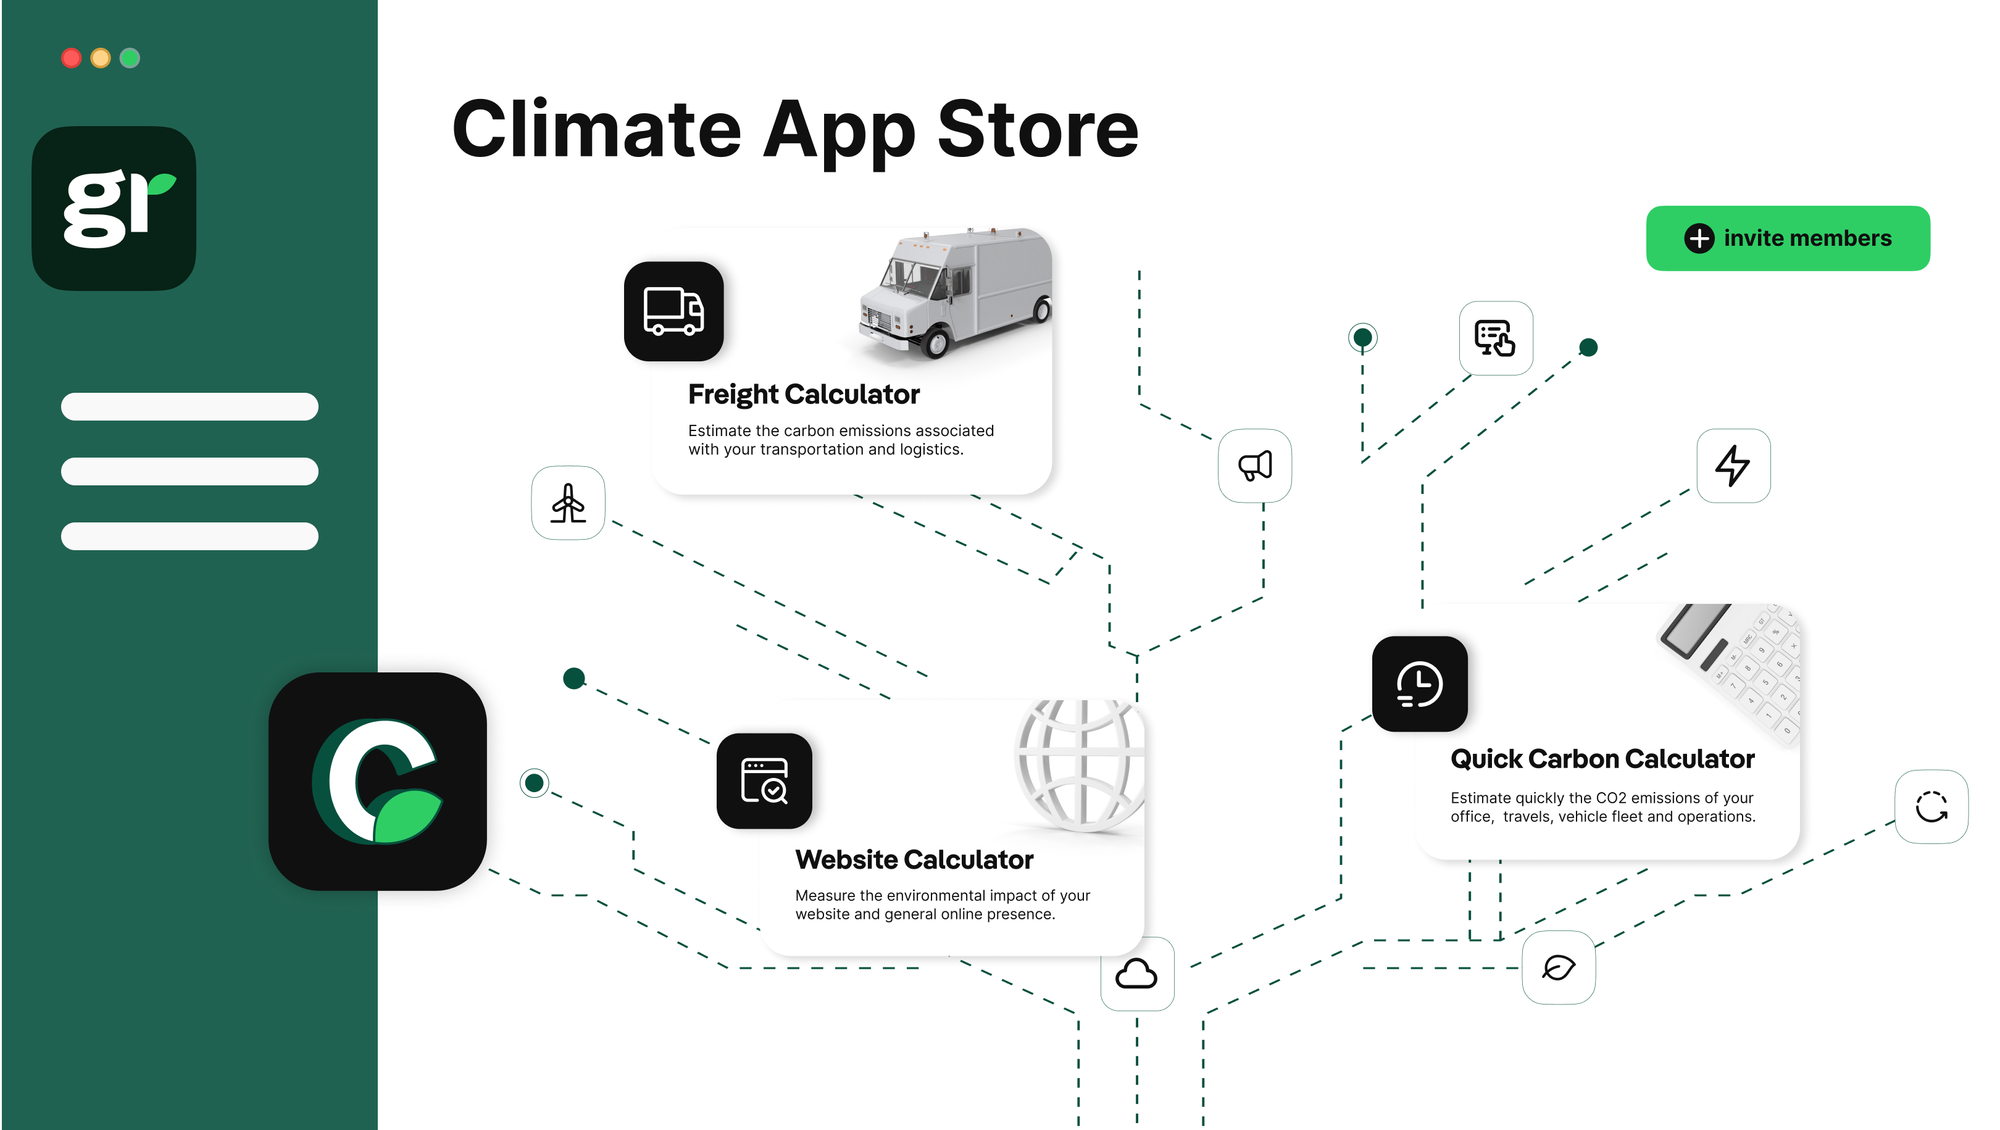 Greenly Climate App Store page with diagram of different apps including a Freight Calculator, Quick Carbon Calculator, and W